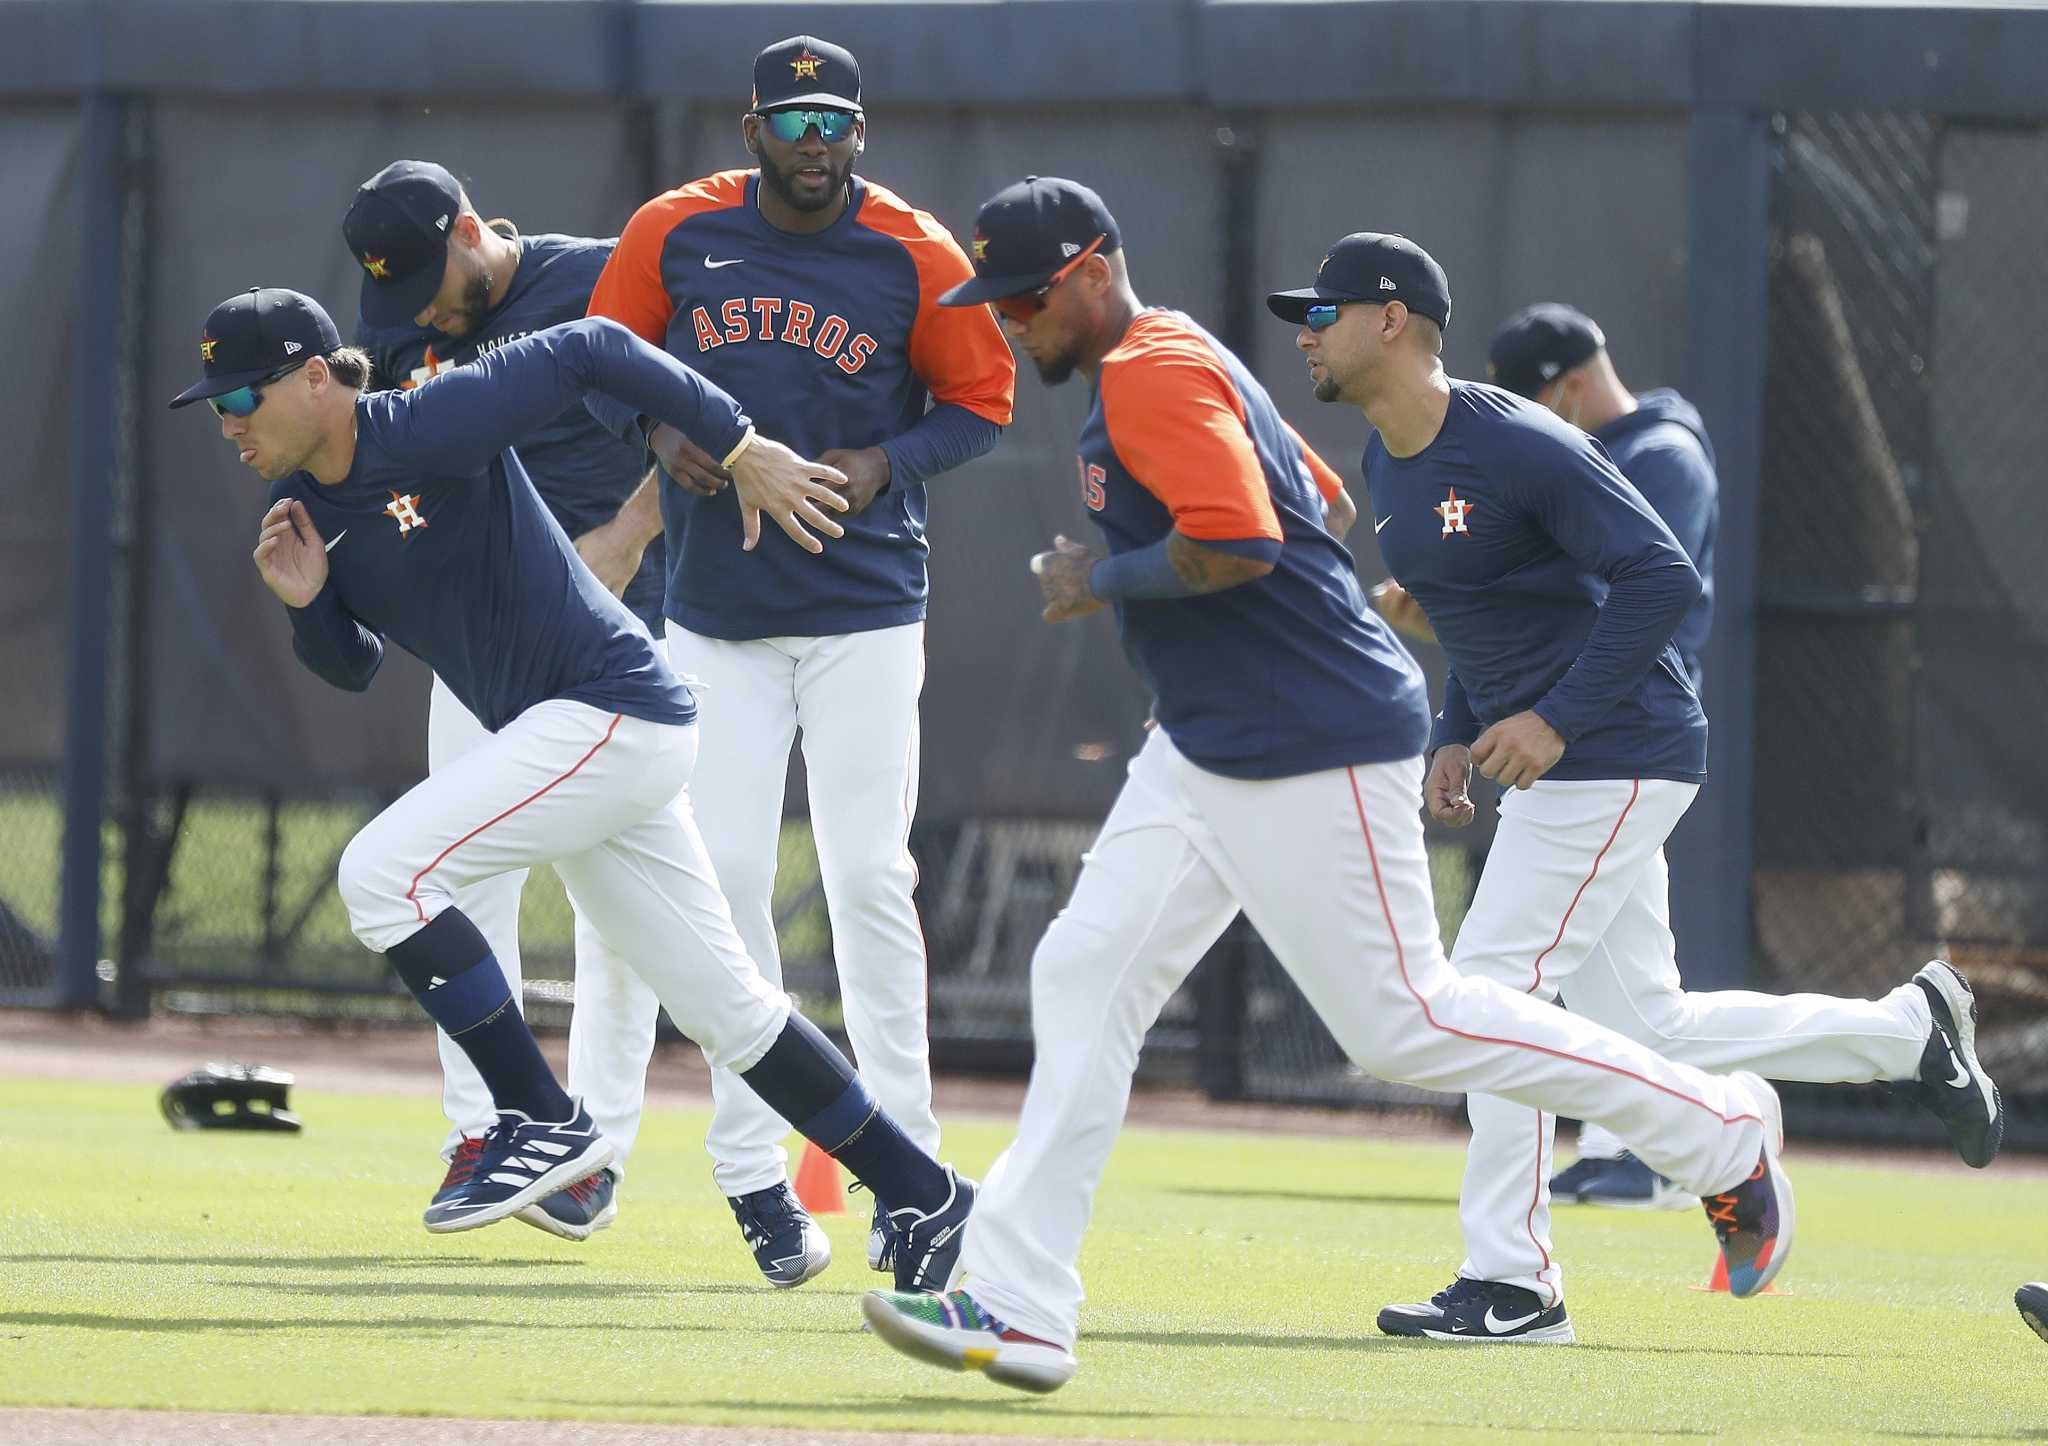 COVID-19 vaccinations go 'extremely smooth' for Astros players - Houston Chronicle